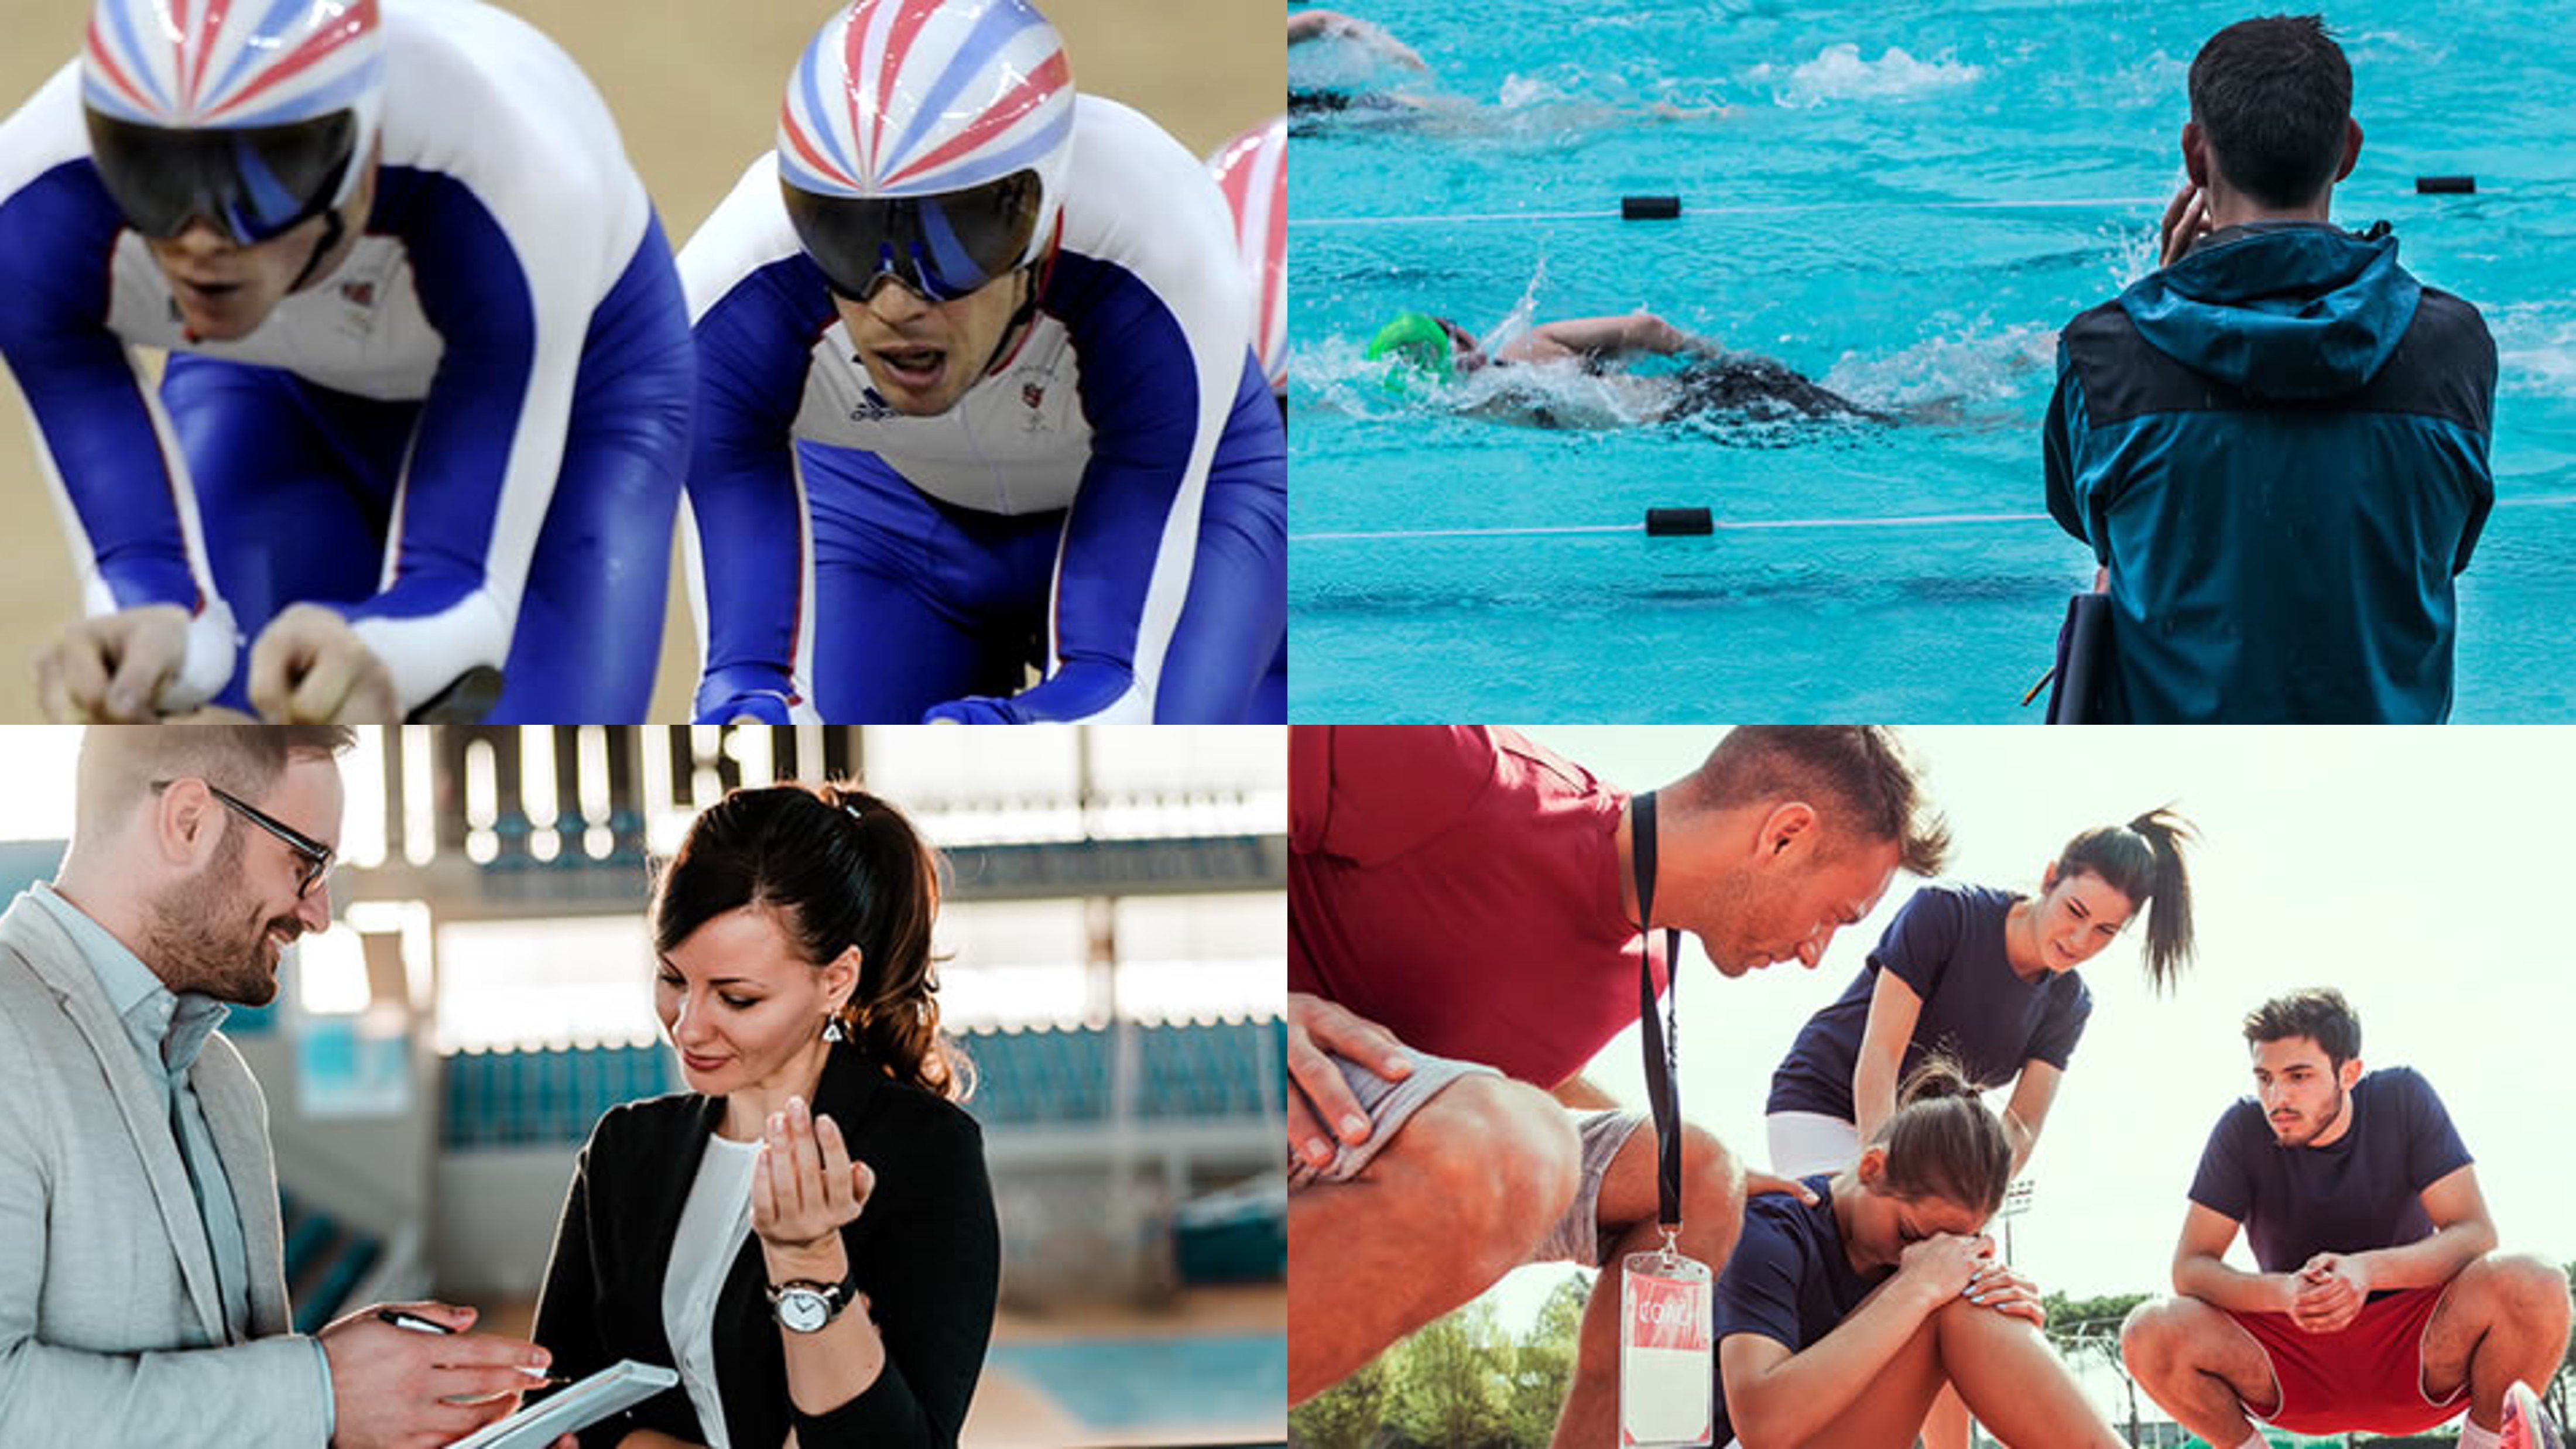 A 4 panel image showing different photos of sports and sports science related activities. There are people cycling, swimming, discussing and coaching after a tough race.